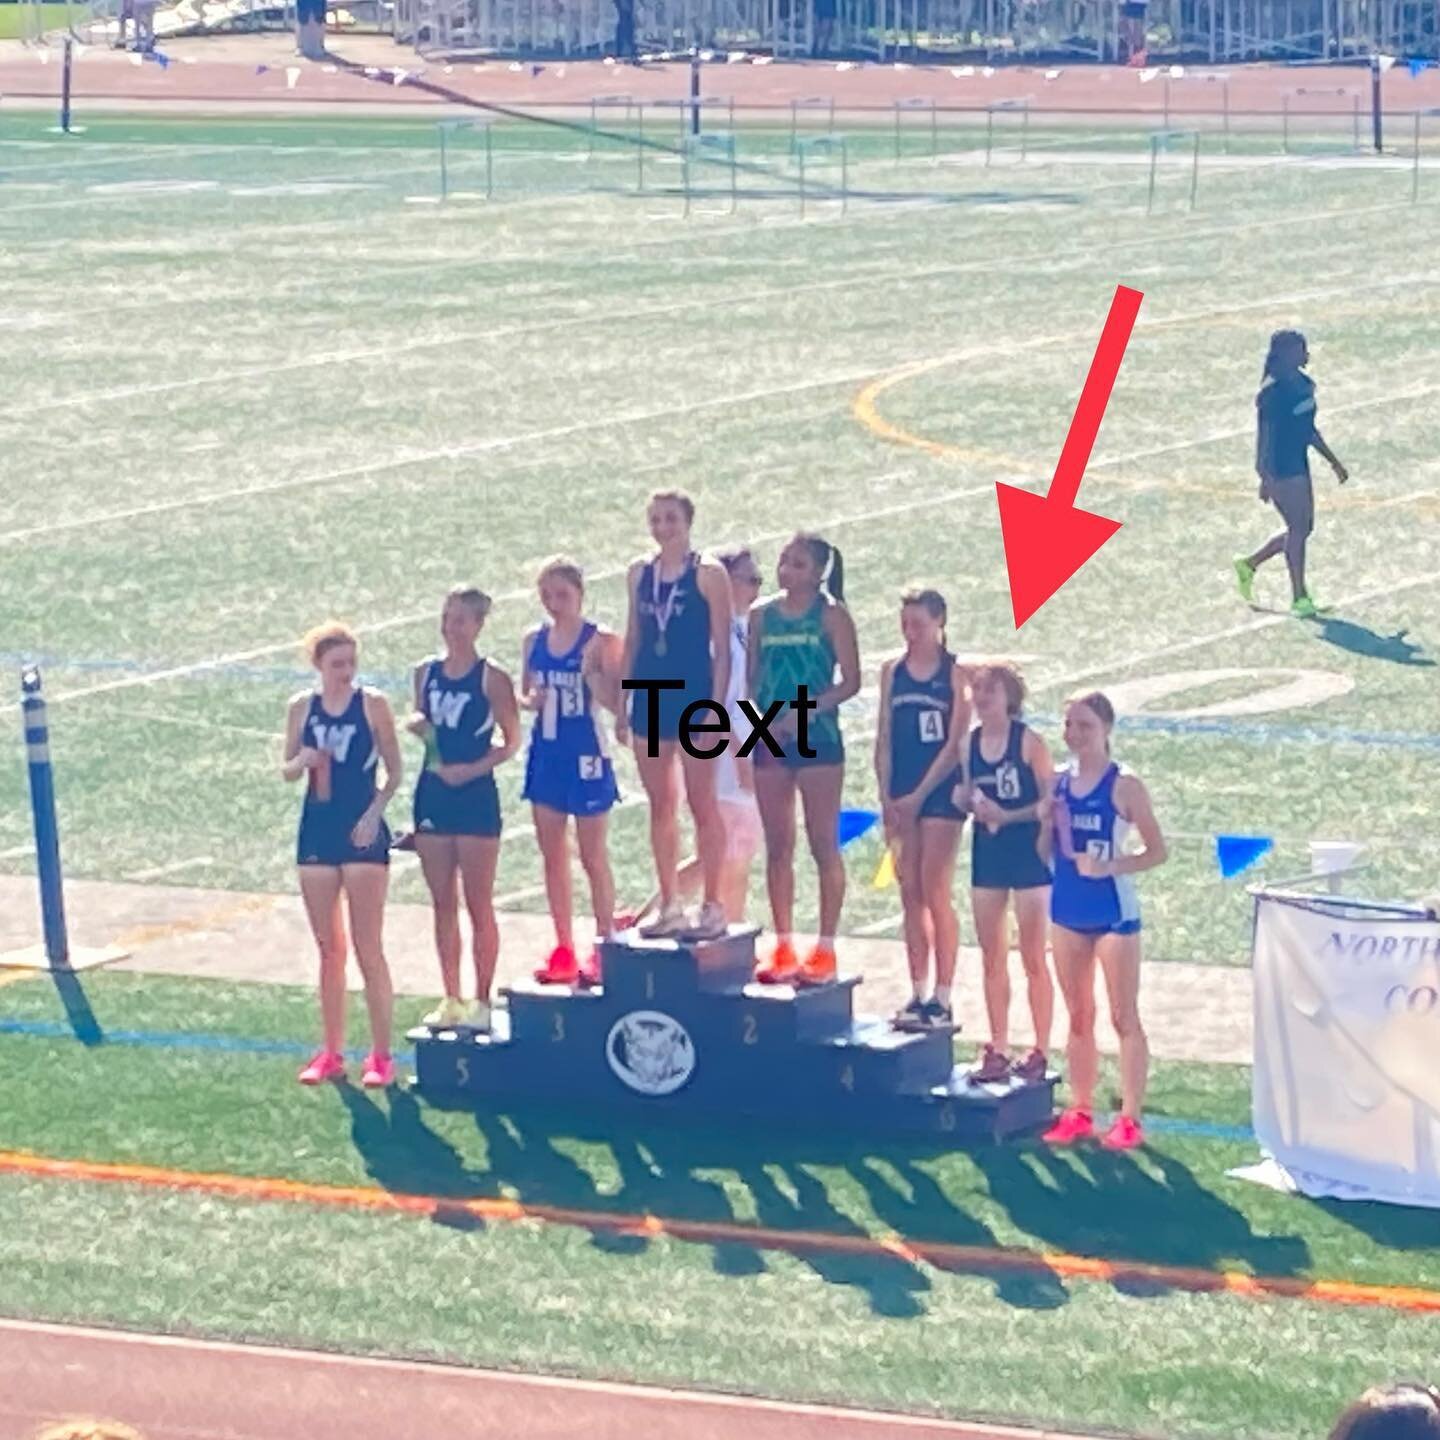 Speedy child PRs in the 1500m at the NW OR Conference Championships! 🥹💜